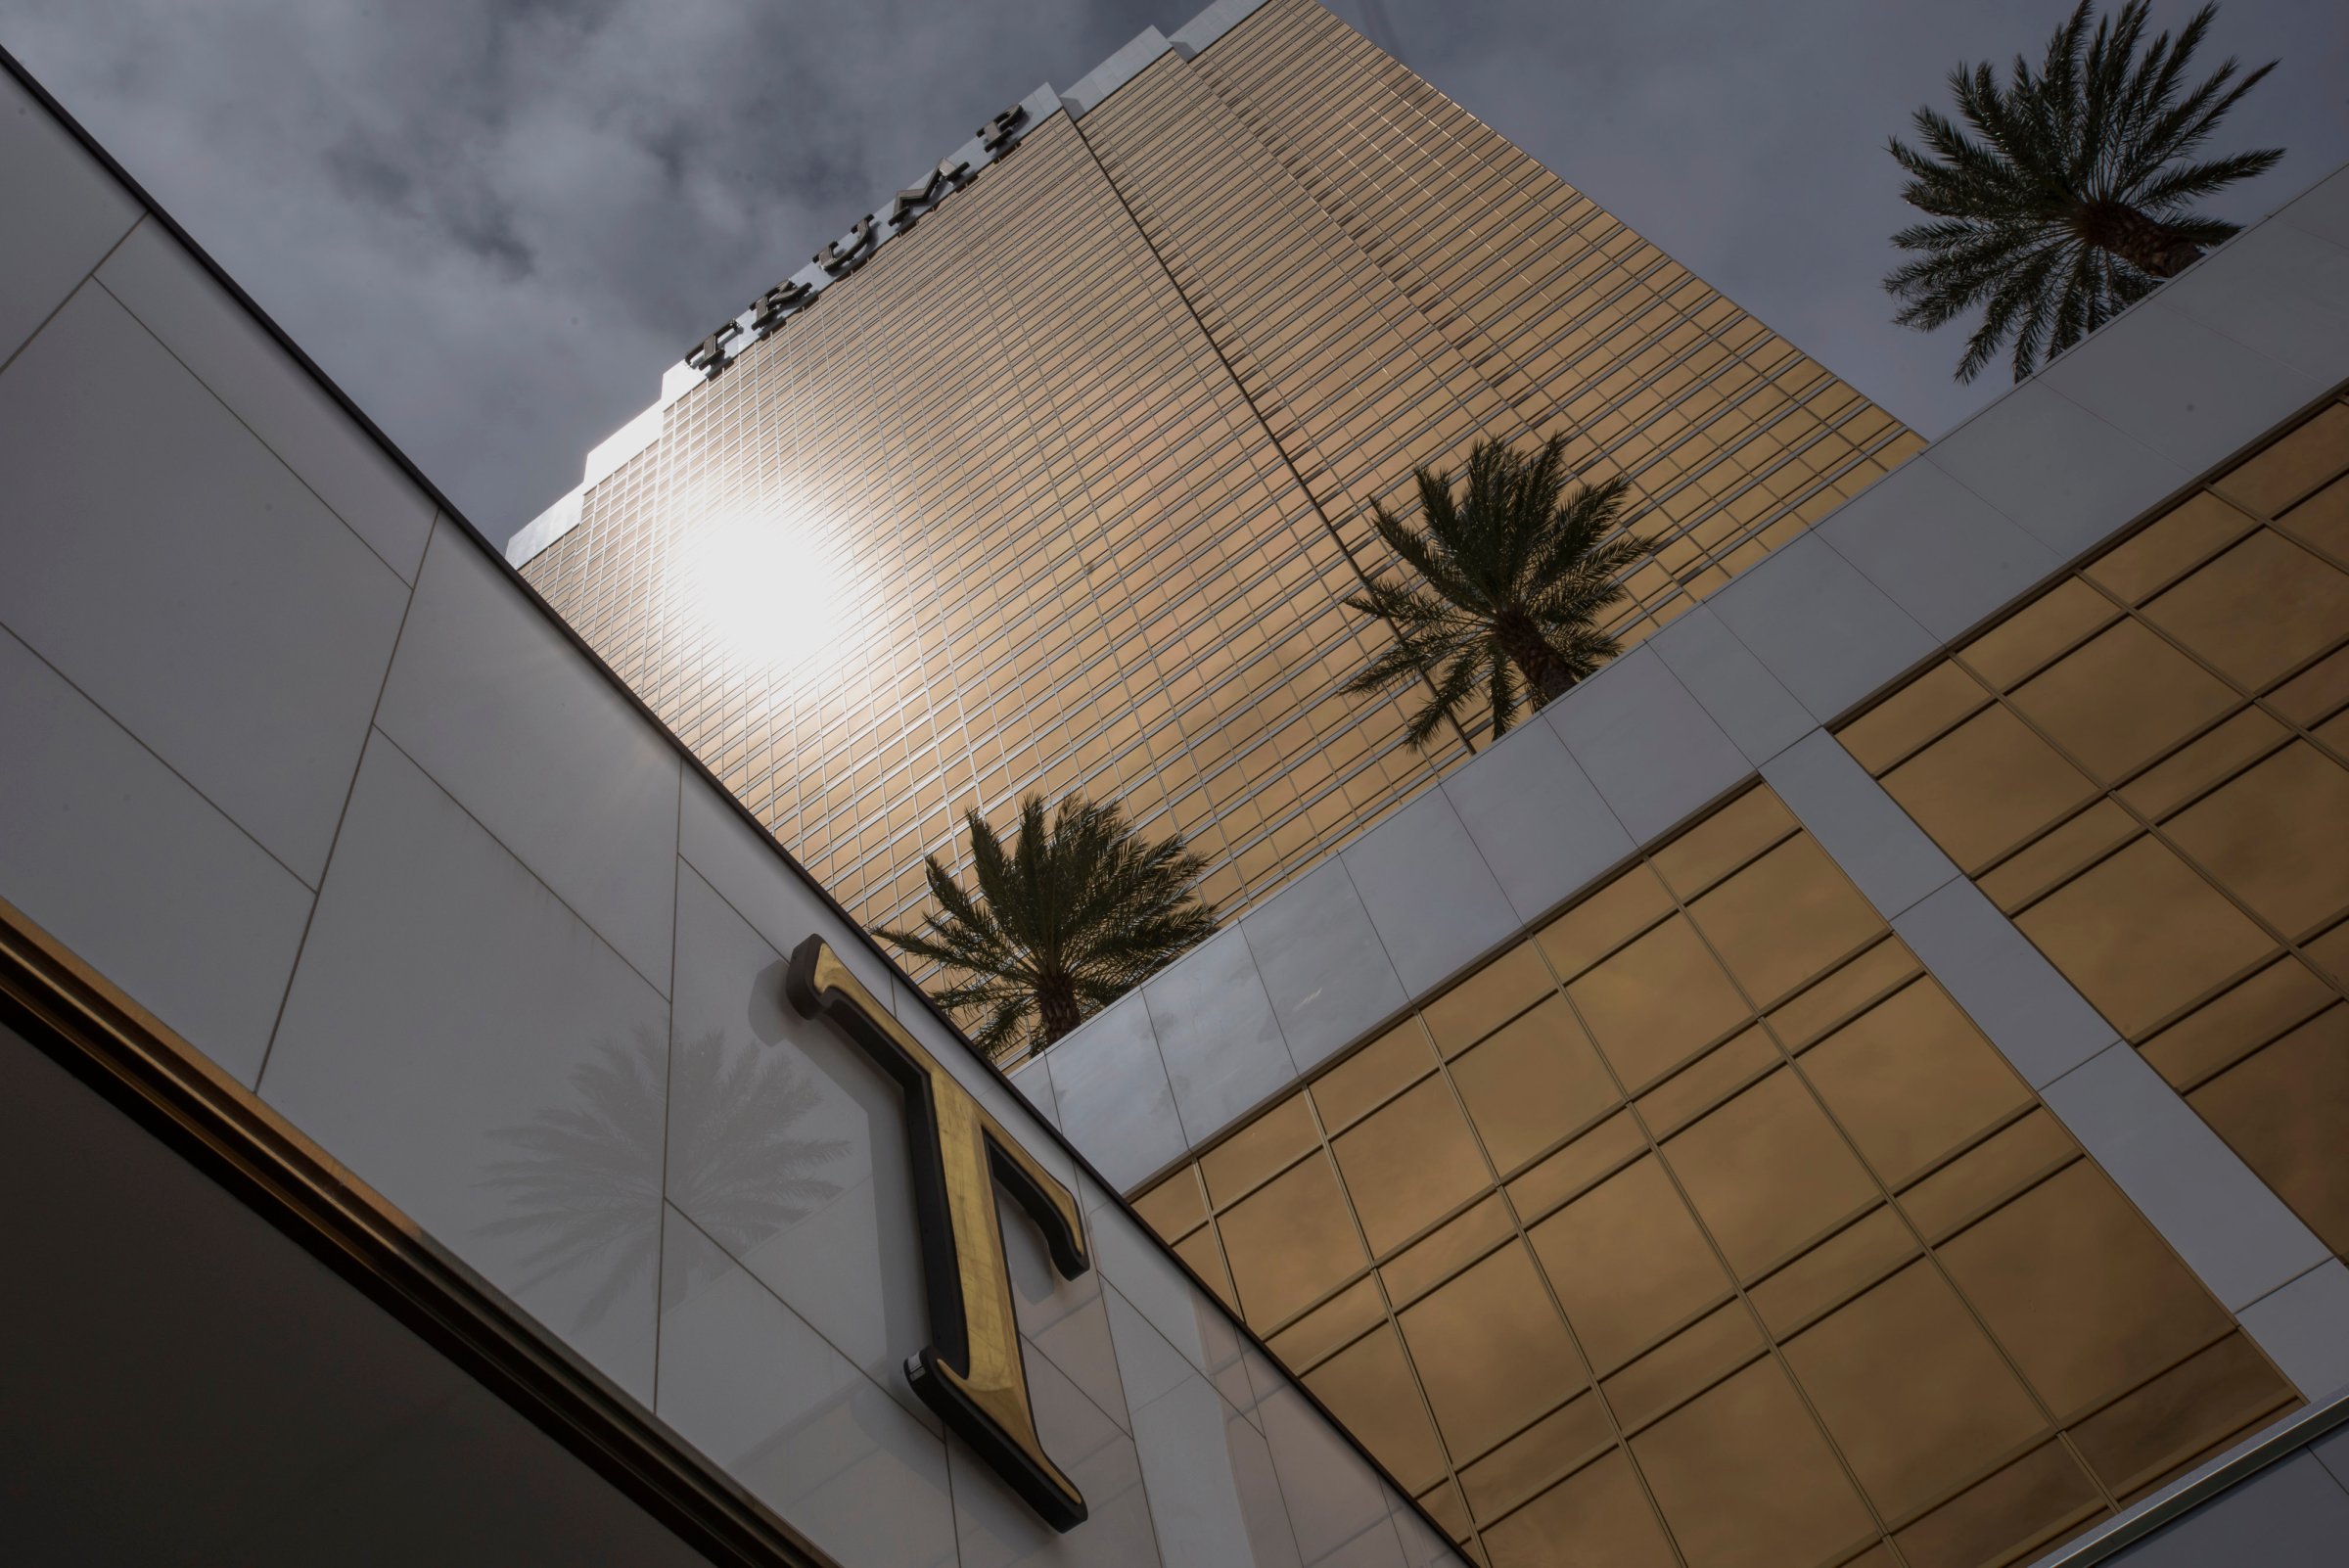 The Trump International Hotel stands in Las Vegas, Nevada on Aug. 5, 2015.